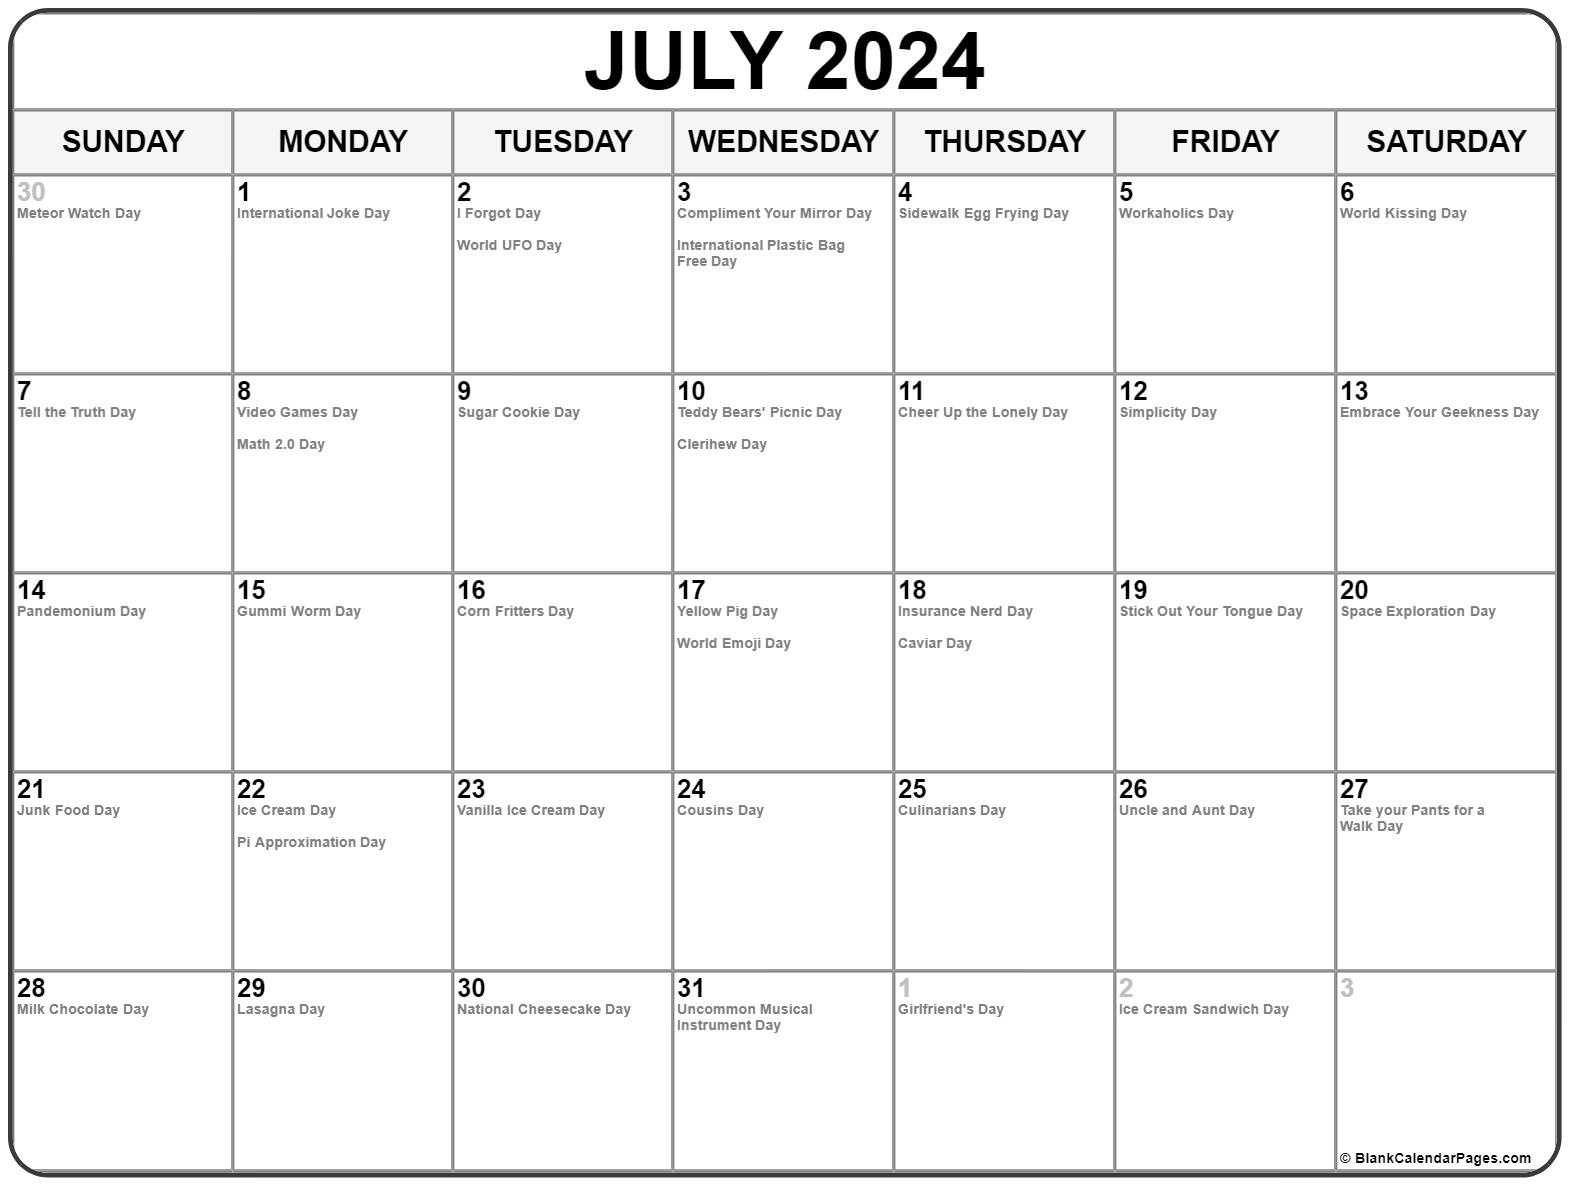 July 2024 With Holidays Calendar within National Day Calendar For July 2024